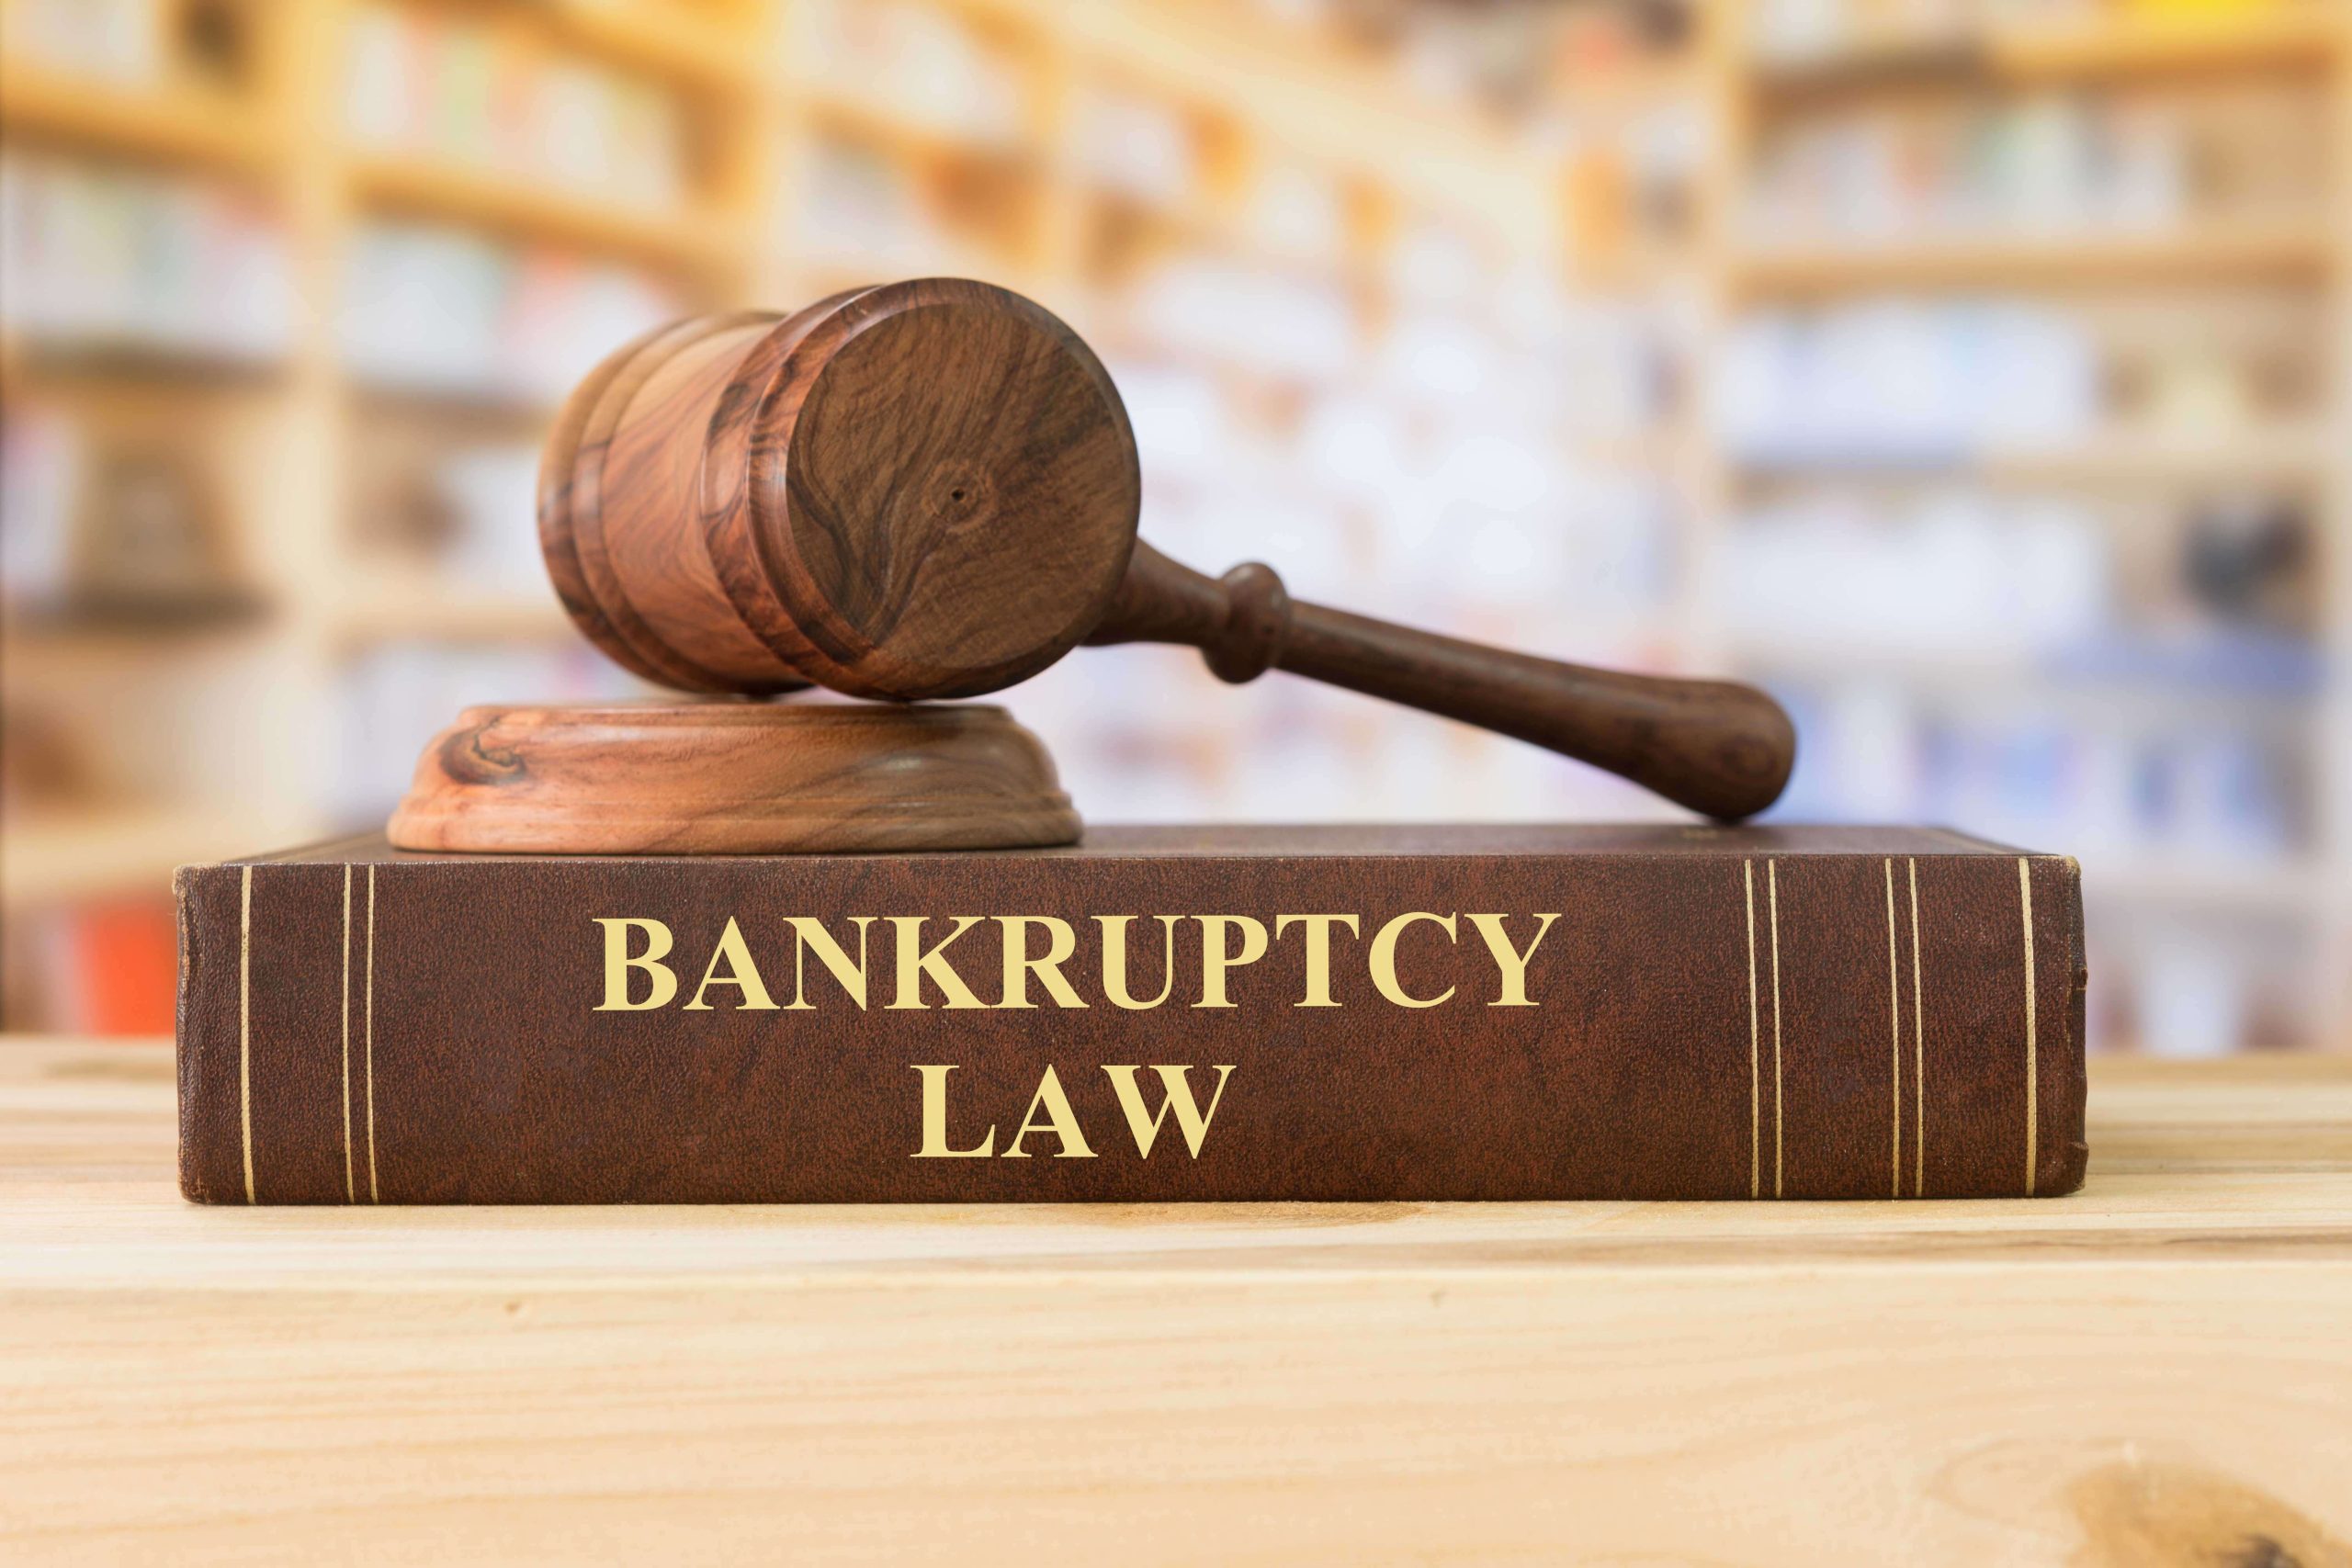 Expert bankruptcy law firm in Harrisonburg, CA - contact us for assistance